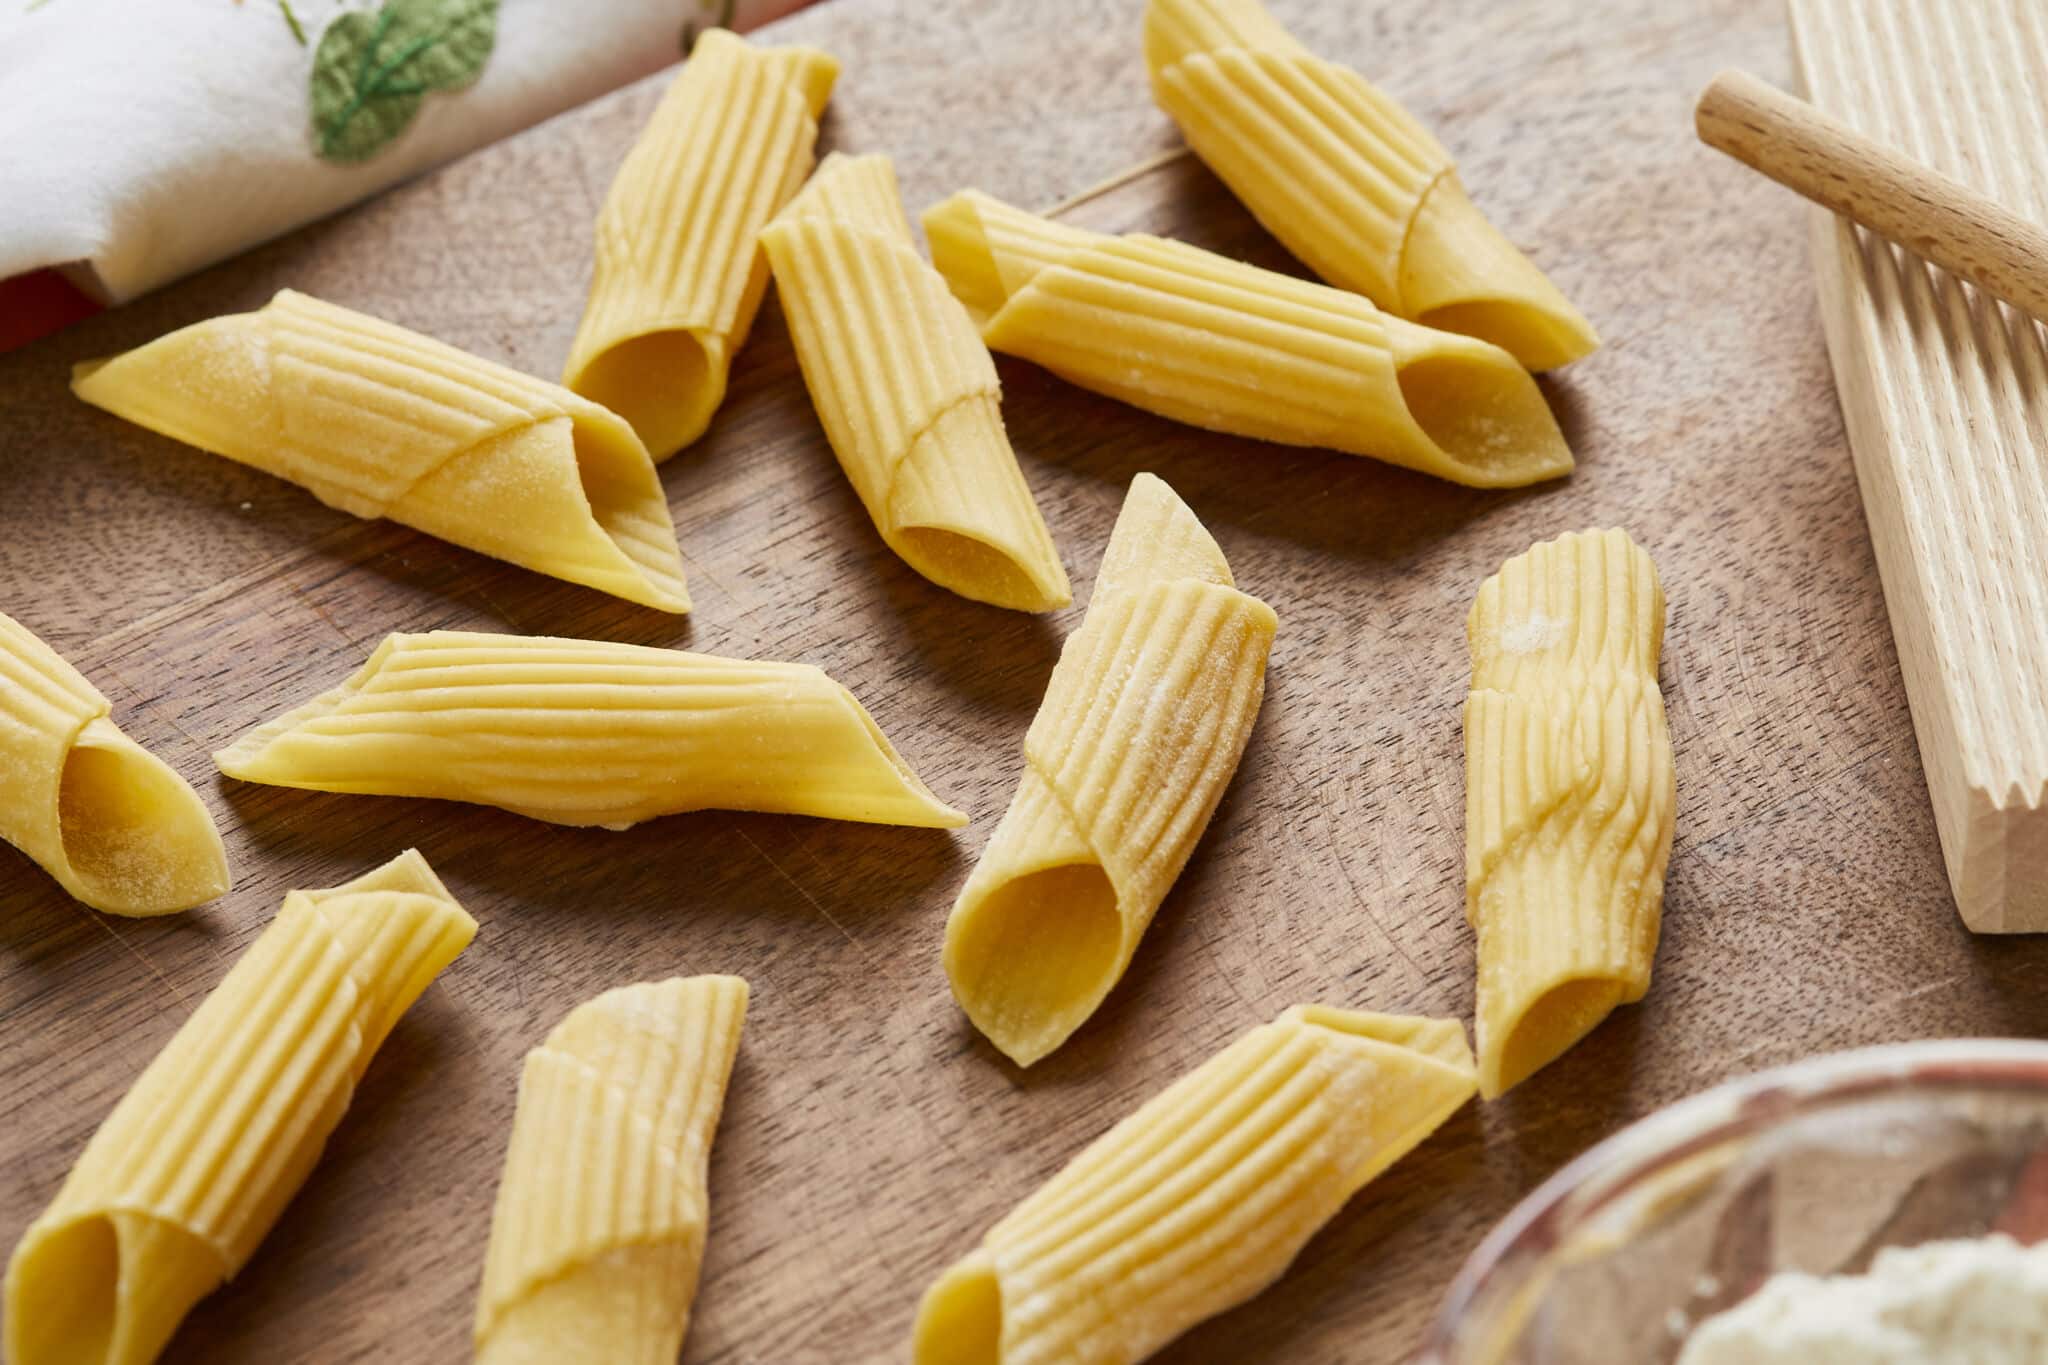 What tools do you need to make pasta?